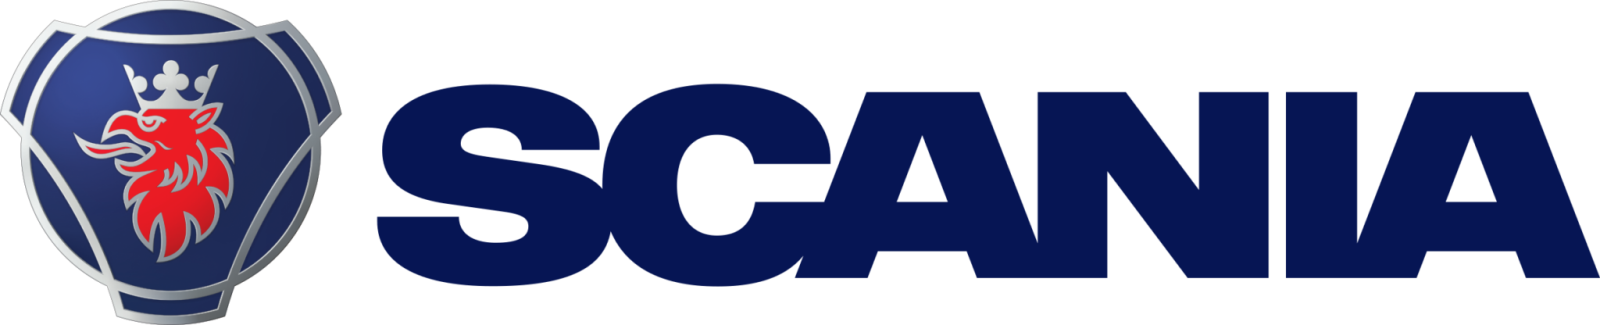 scania-logo-a.png